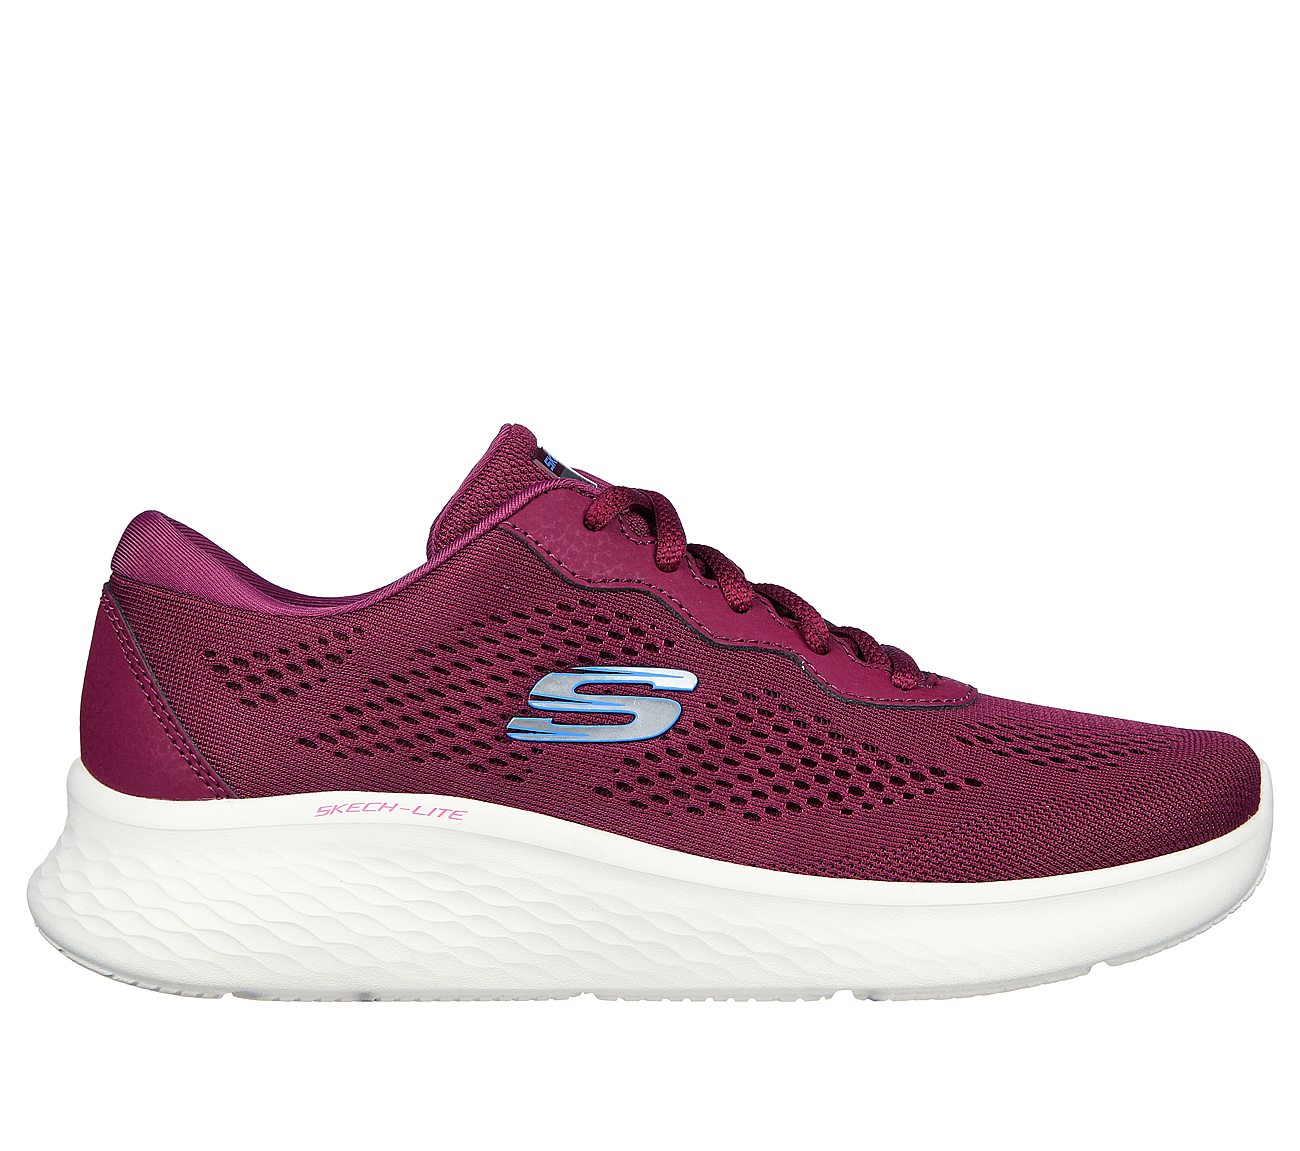 Skechers Makes First Wholesale Apparel Line